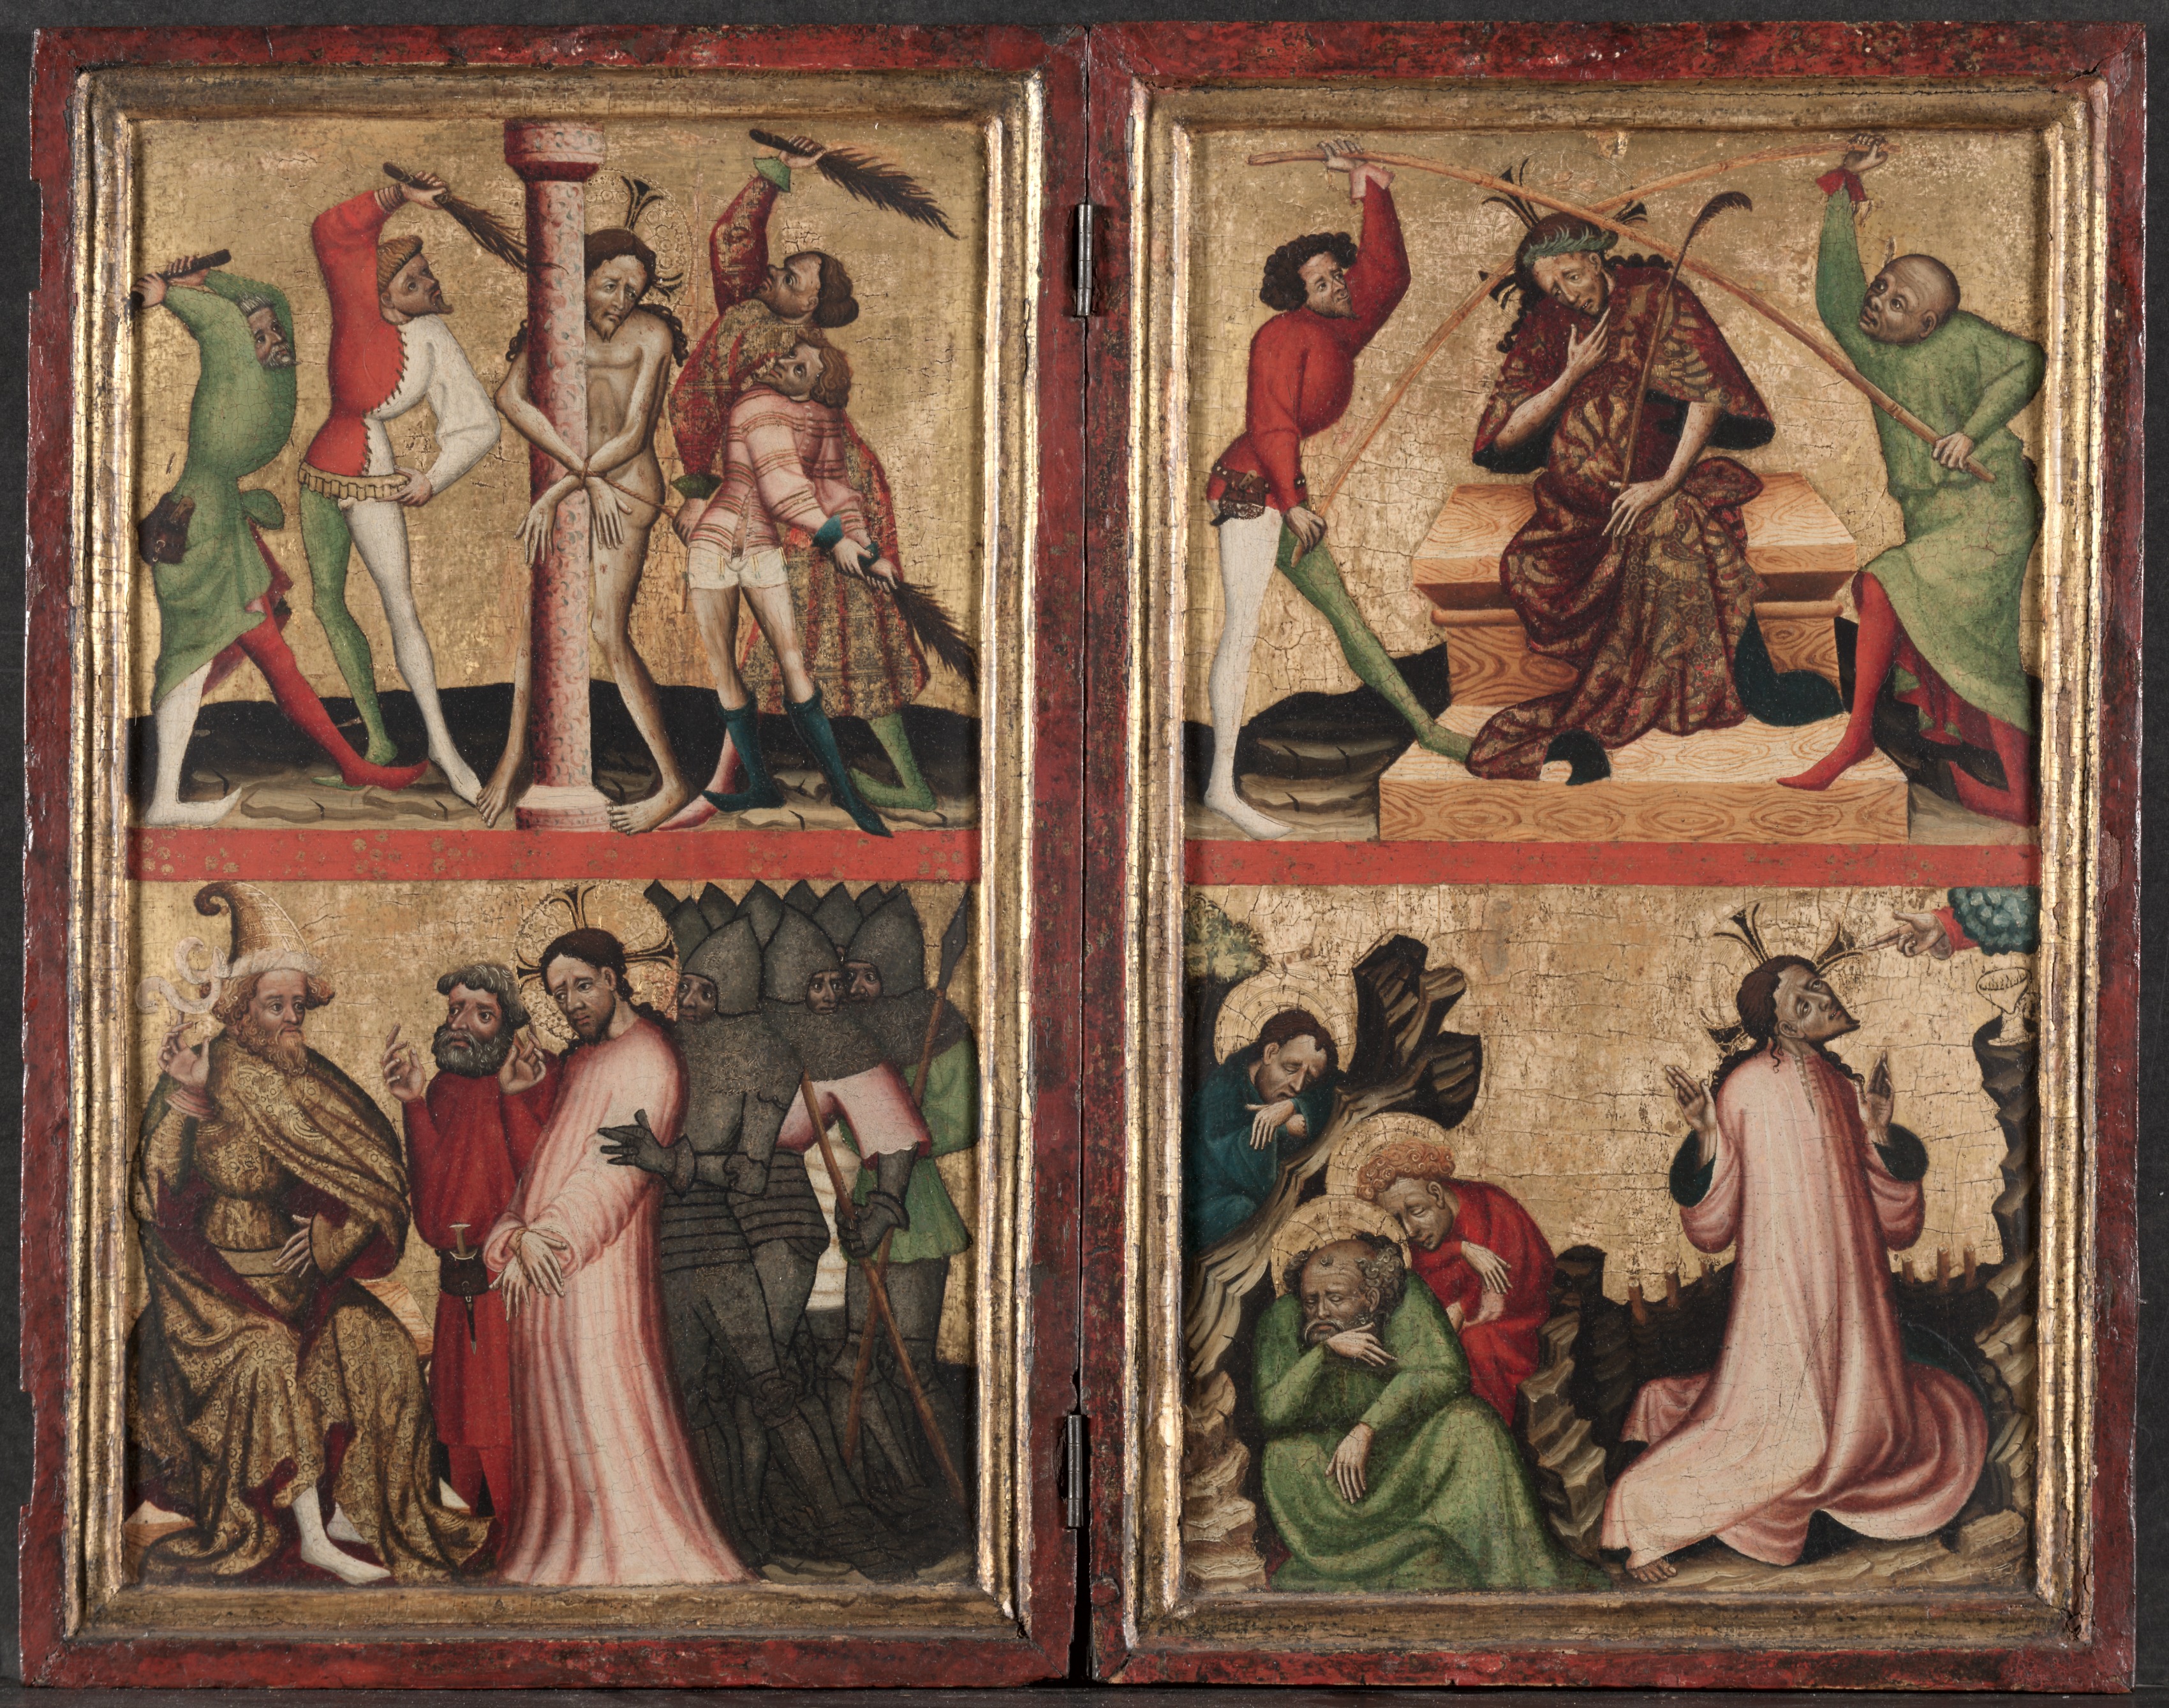 Diptych with the Passion of Christ